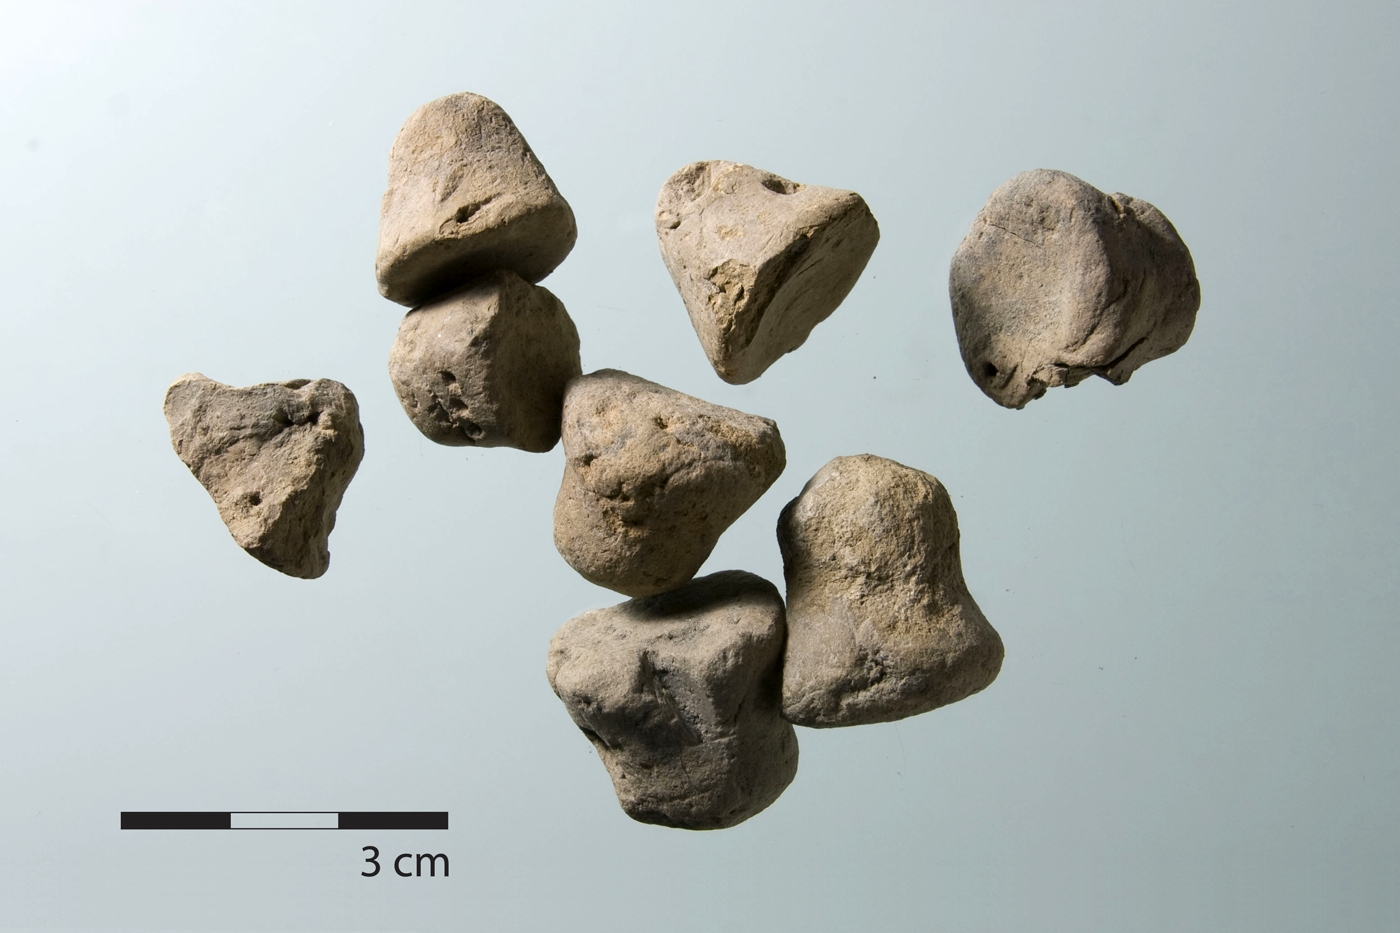 Squat and conical tokens from ash layers in House 2.